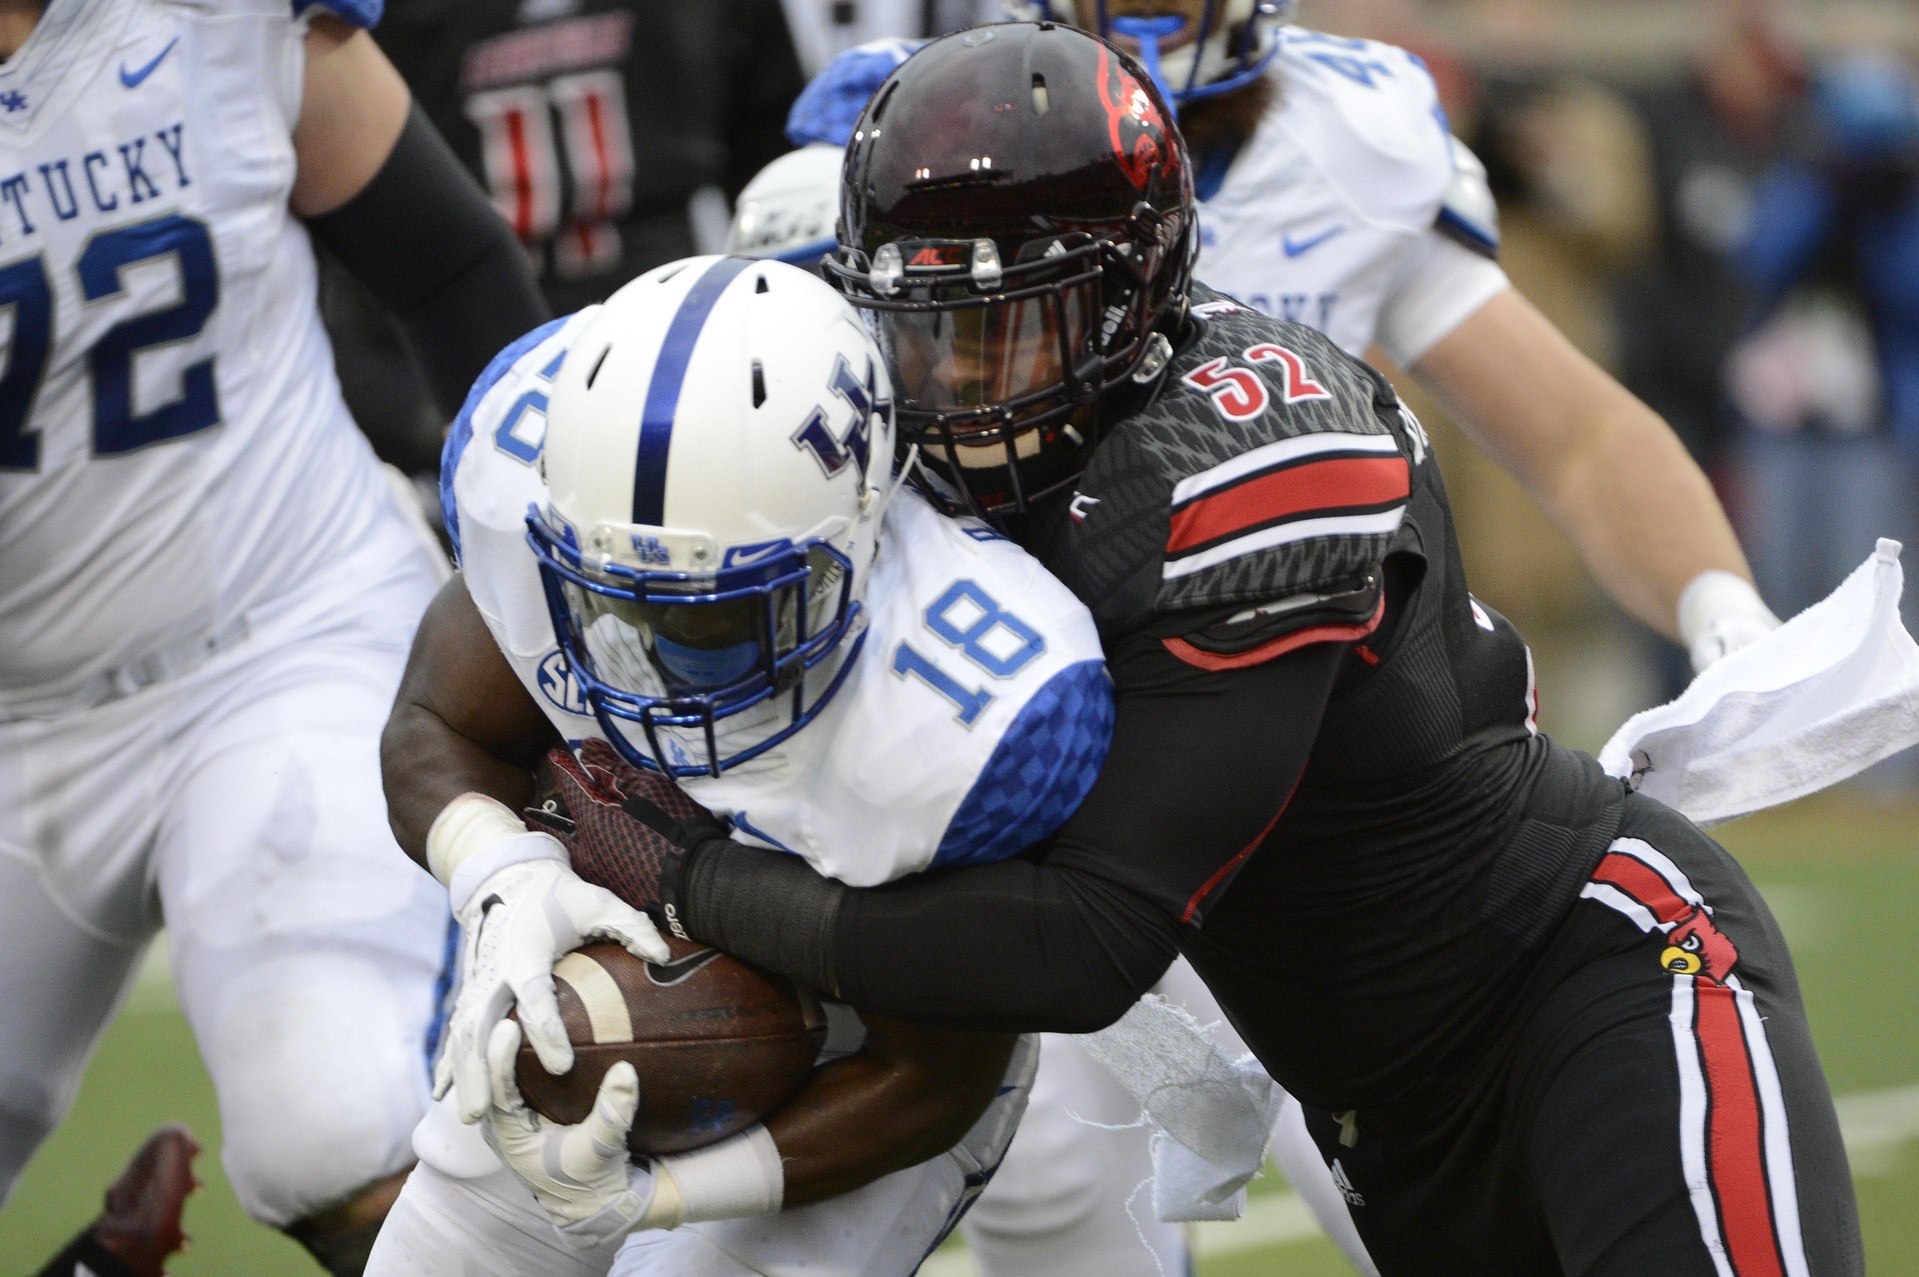 Nov 29, 2014; Louisville, KY, USA; Kentucky Wildcats running back Stanley Williams (18) breaks the tackle of Louisville Cardinals linebacker Nick Dawson-Brents (52) to score a touchdown during the second half at Papa John's Cardinal Stadium. Louisville defeated Kentucky 44-40. Mandatory Credit: Jamie Rhodes-USA TODAY Sports